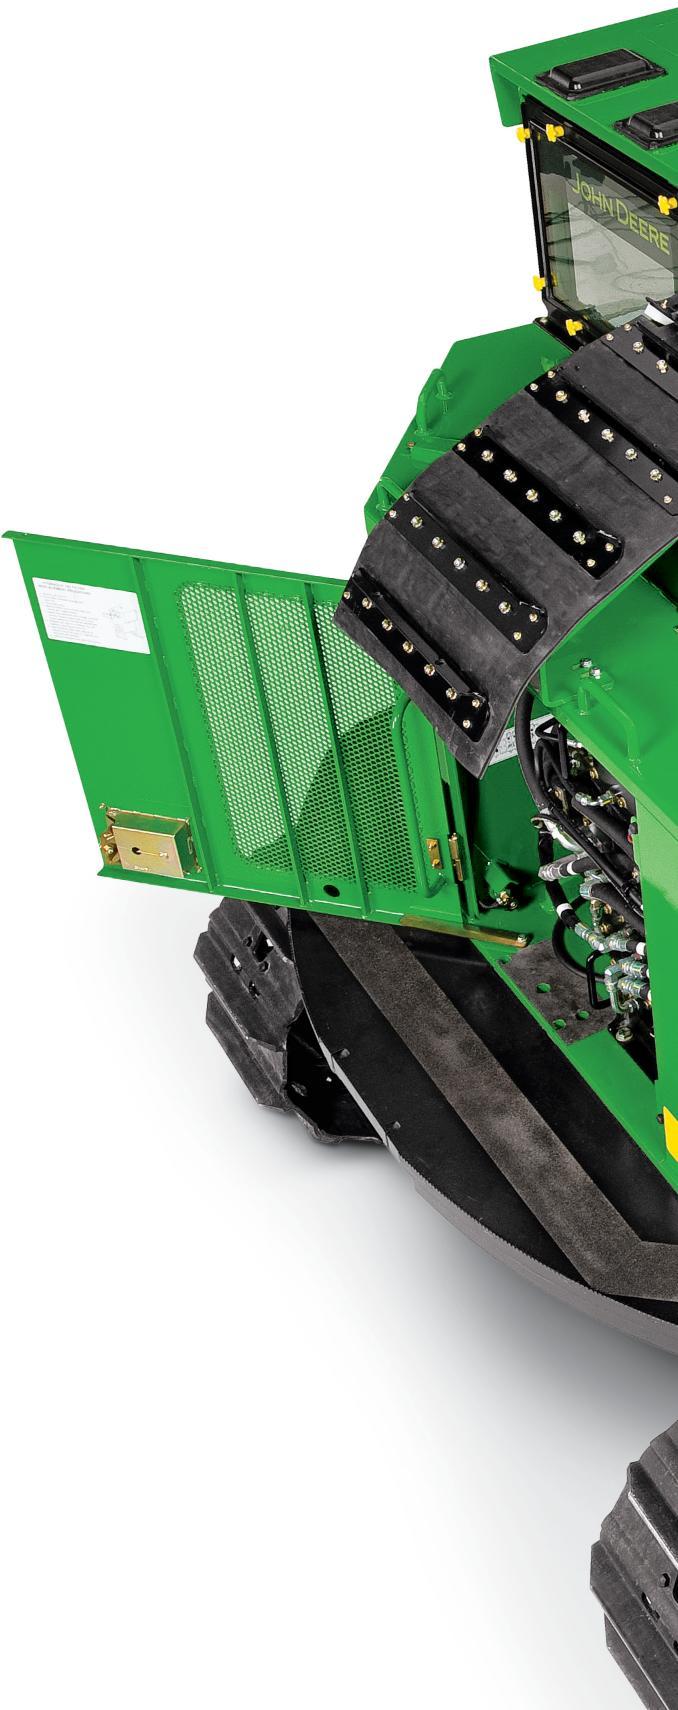 Cuts costs while cutting timber. Cutting wood isn t the only area where your John Deere tracked feller buncher excels.